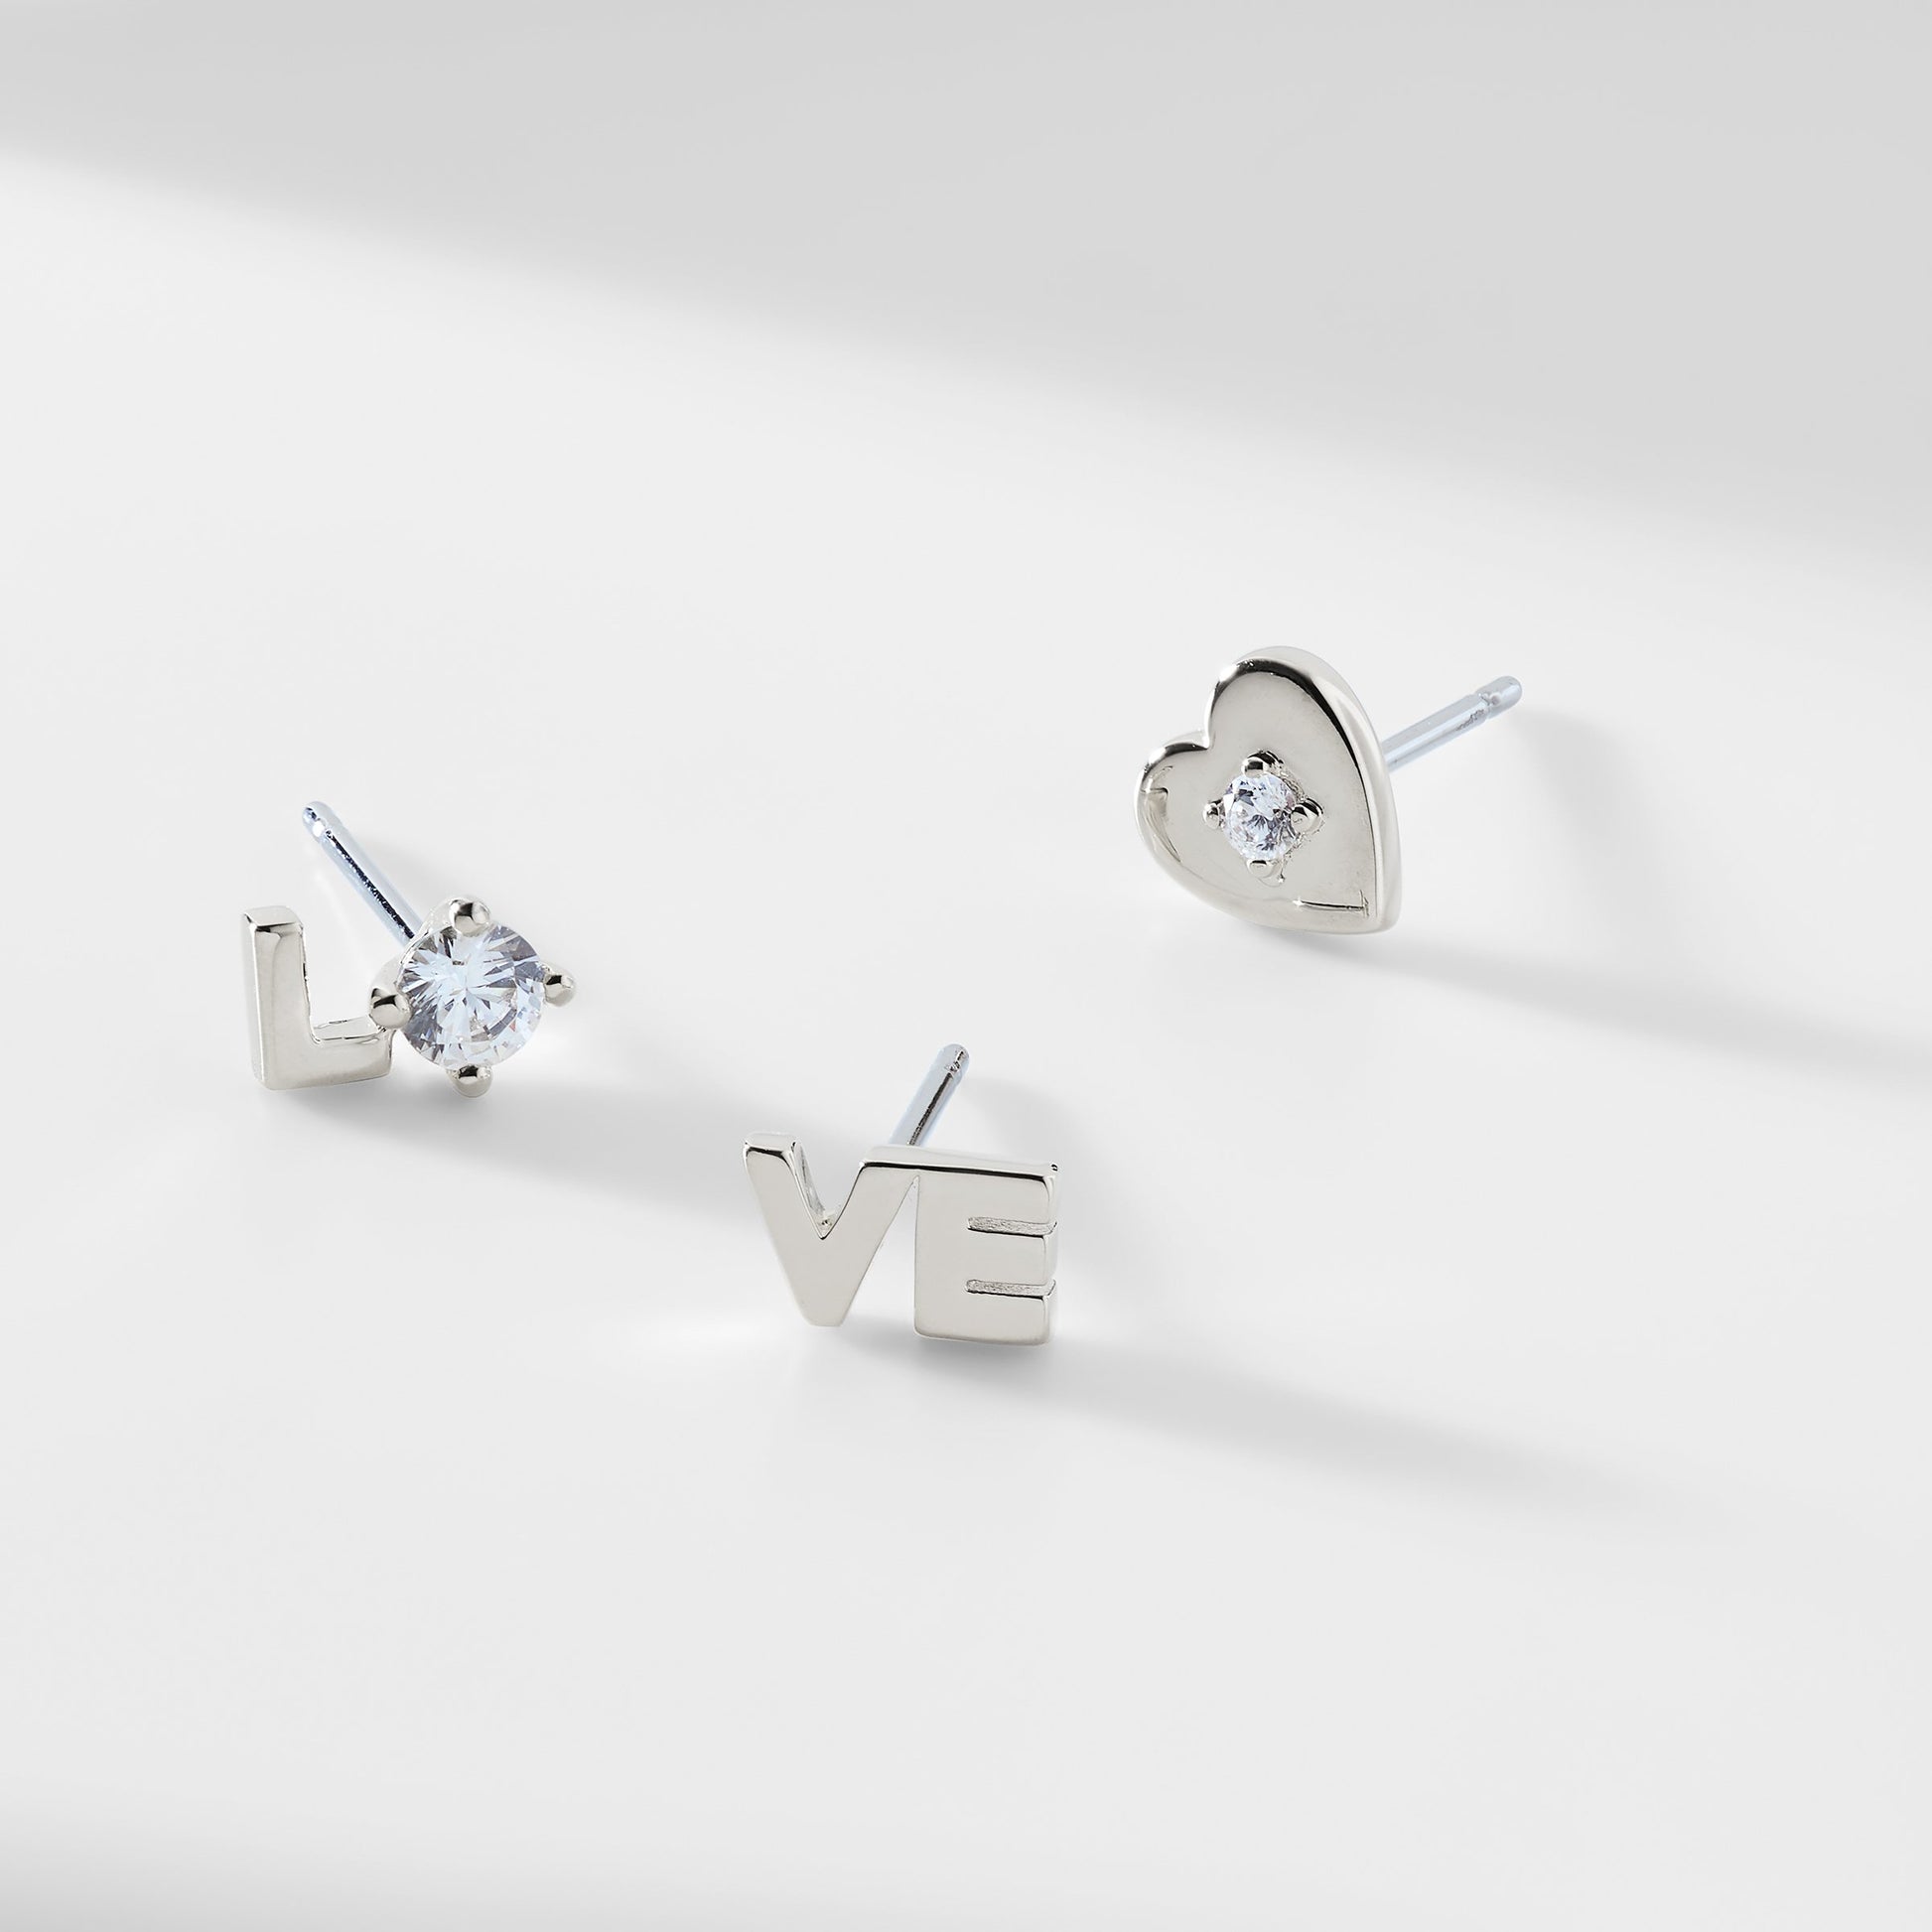 Silver stud earrings that spell out "LO-VE" and a silver heart stud earring with a CZ stone